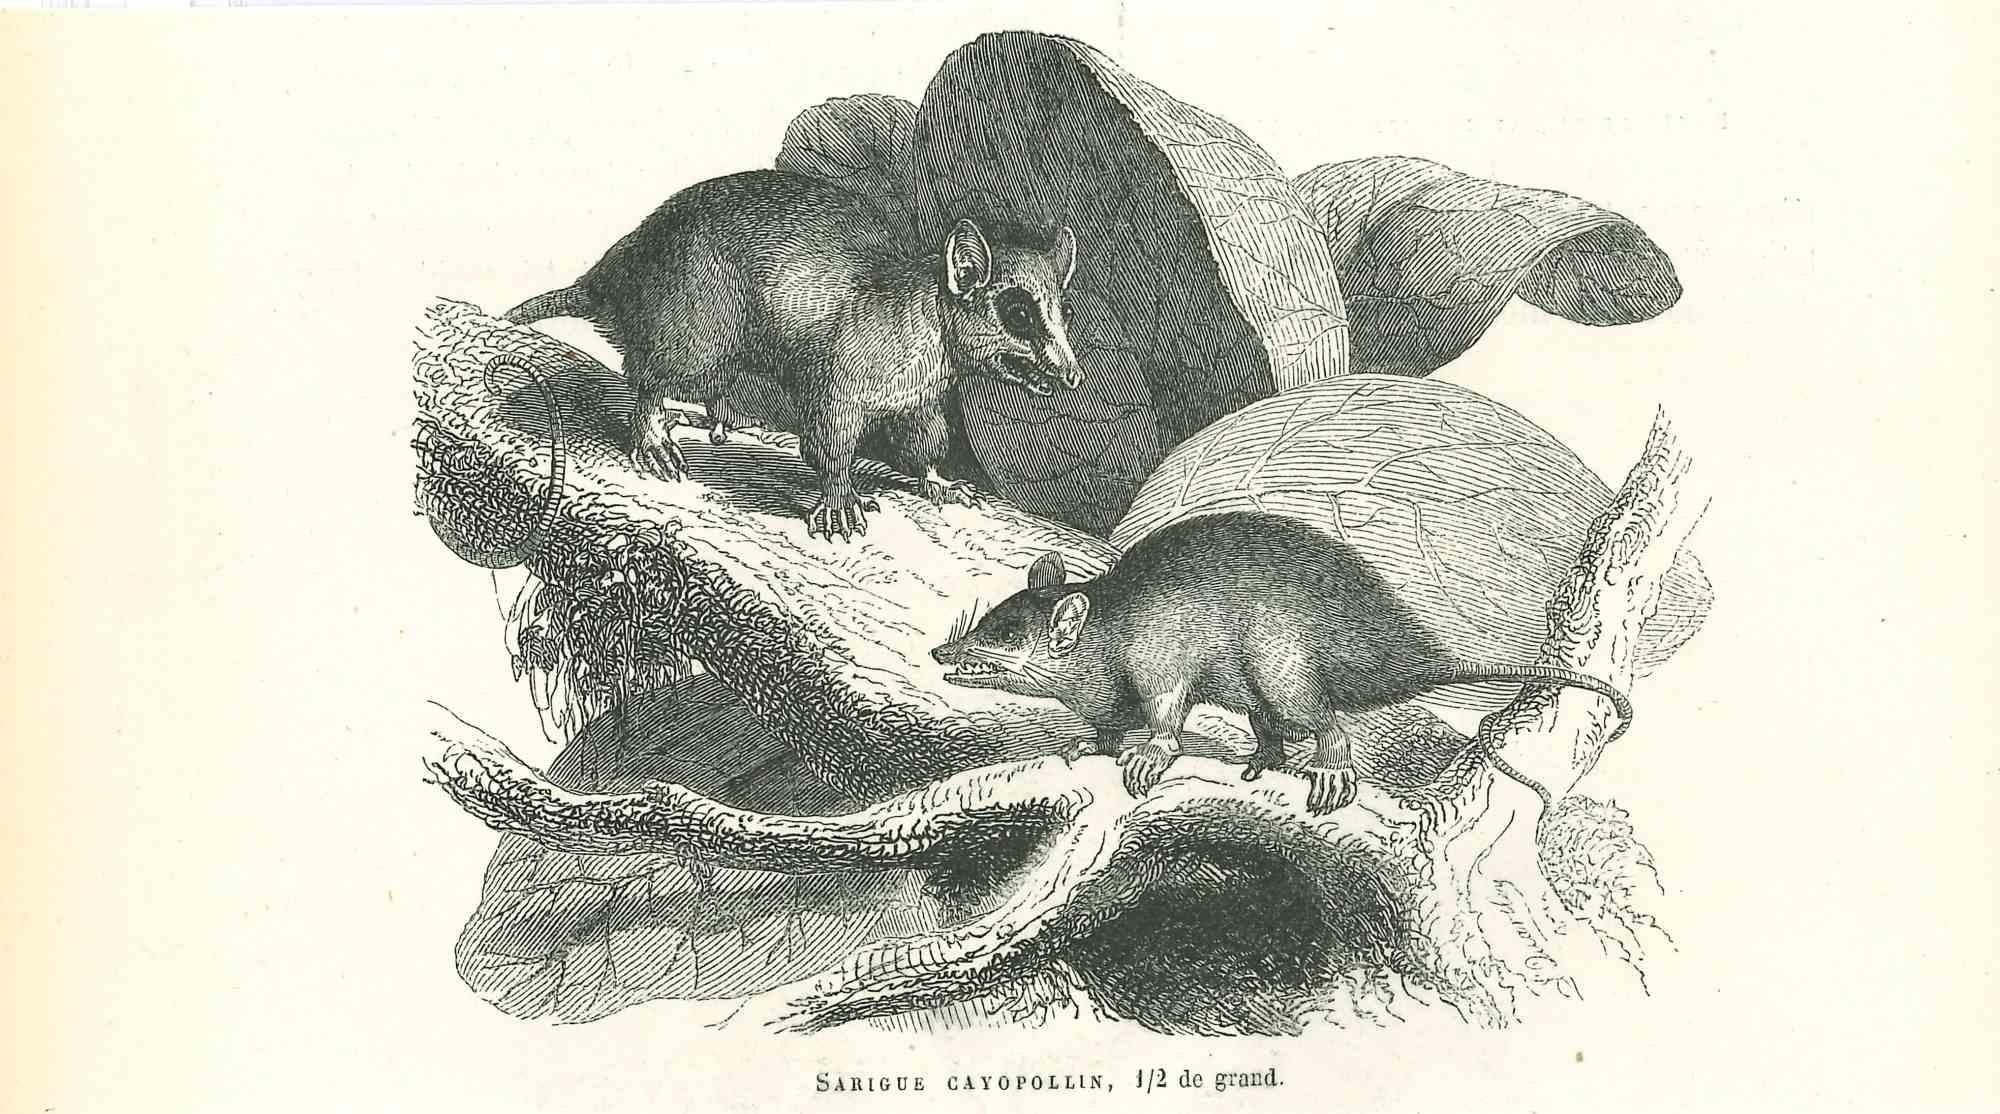 The Mouses is an original lithograph on ivory-colored paper, realized by Paul Gervais (1816-1879). The artwork is from The Series of "Les Trois Règnes de la Nature", and was published in 1854.

Good conditions.

Titled on the lower. With the notes